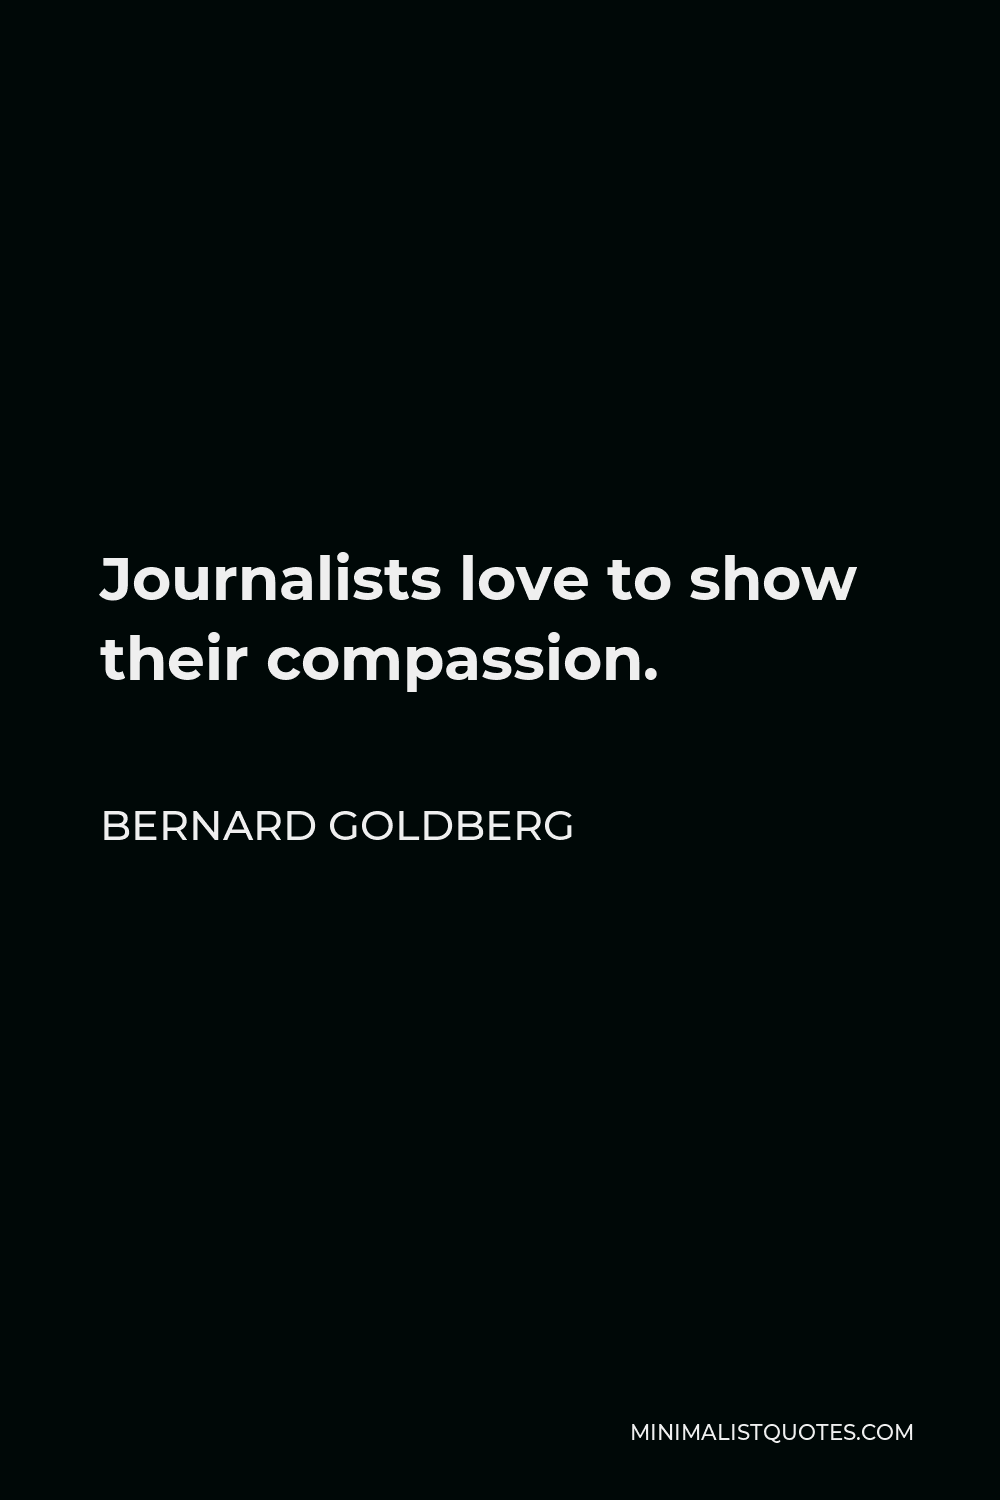 Bernard Goldberg Quote - Journalists love to show their compassion.